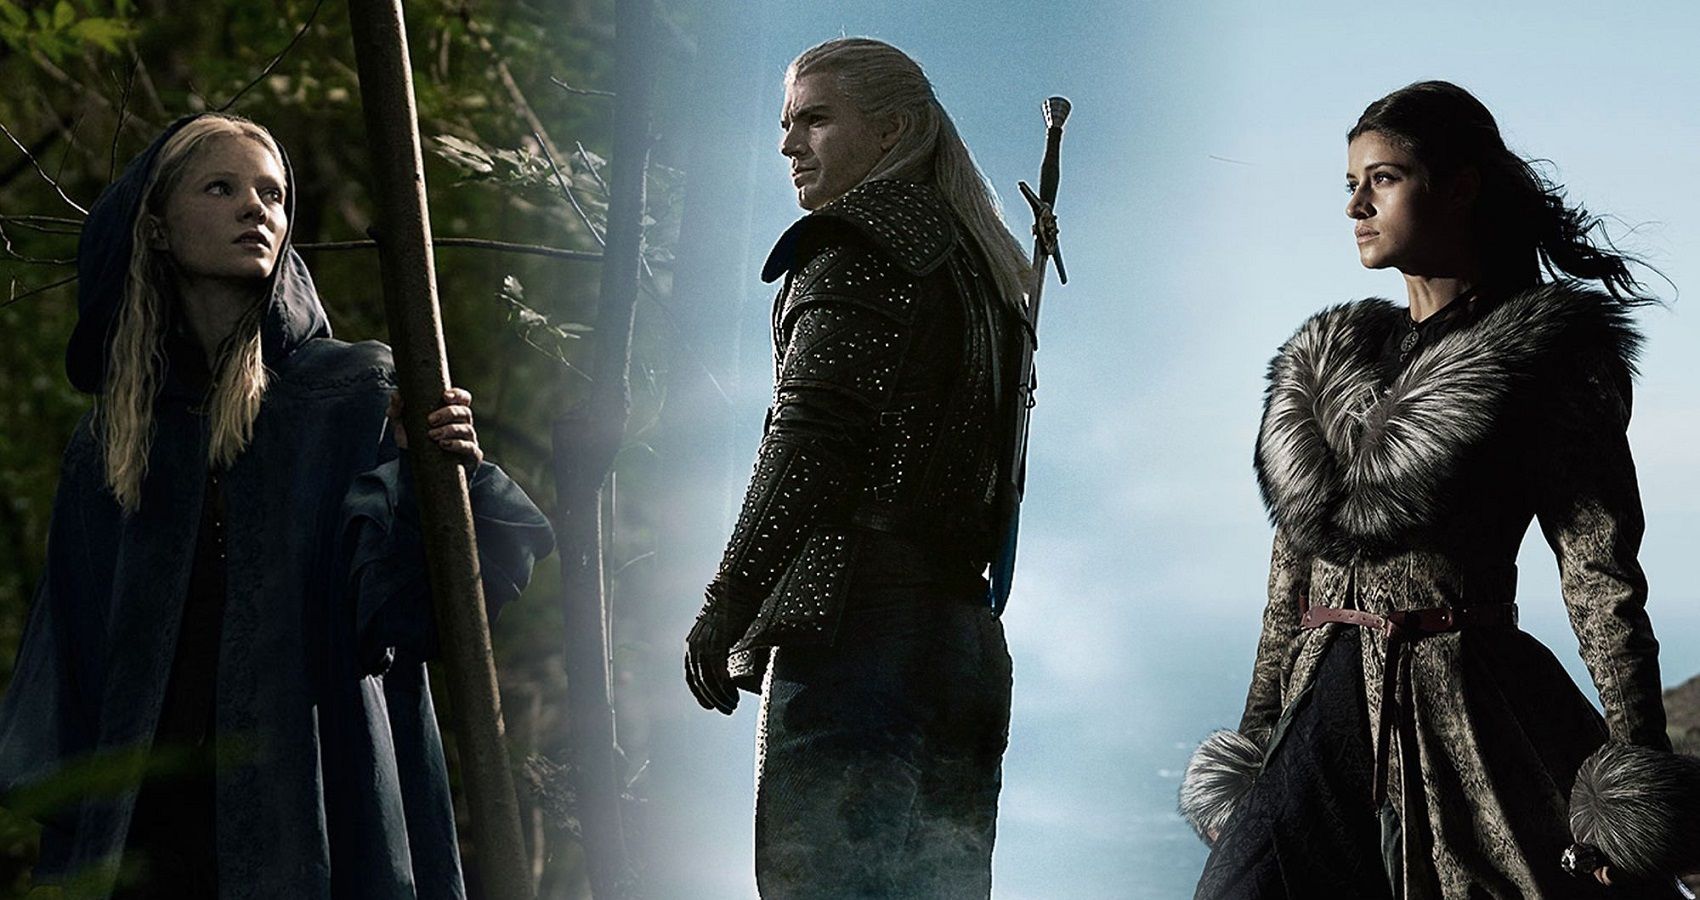 The Witcher The End's Beginning (TV Episode 2019) - IMDb